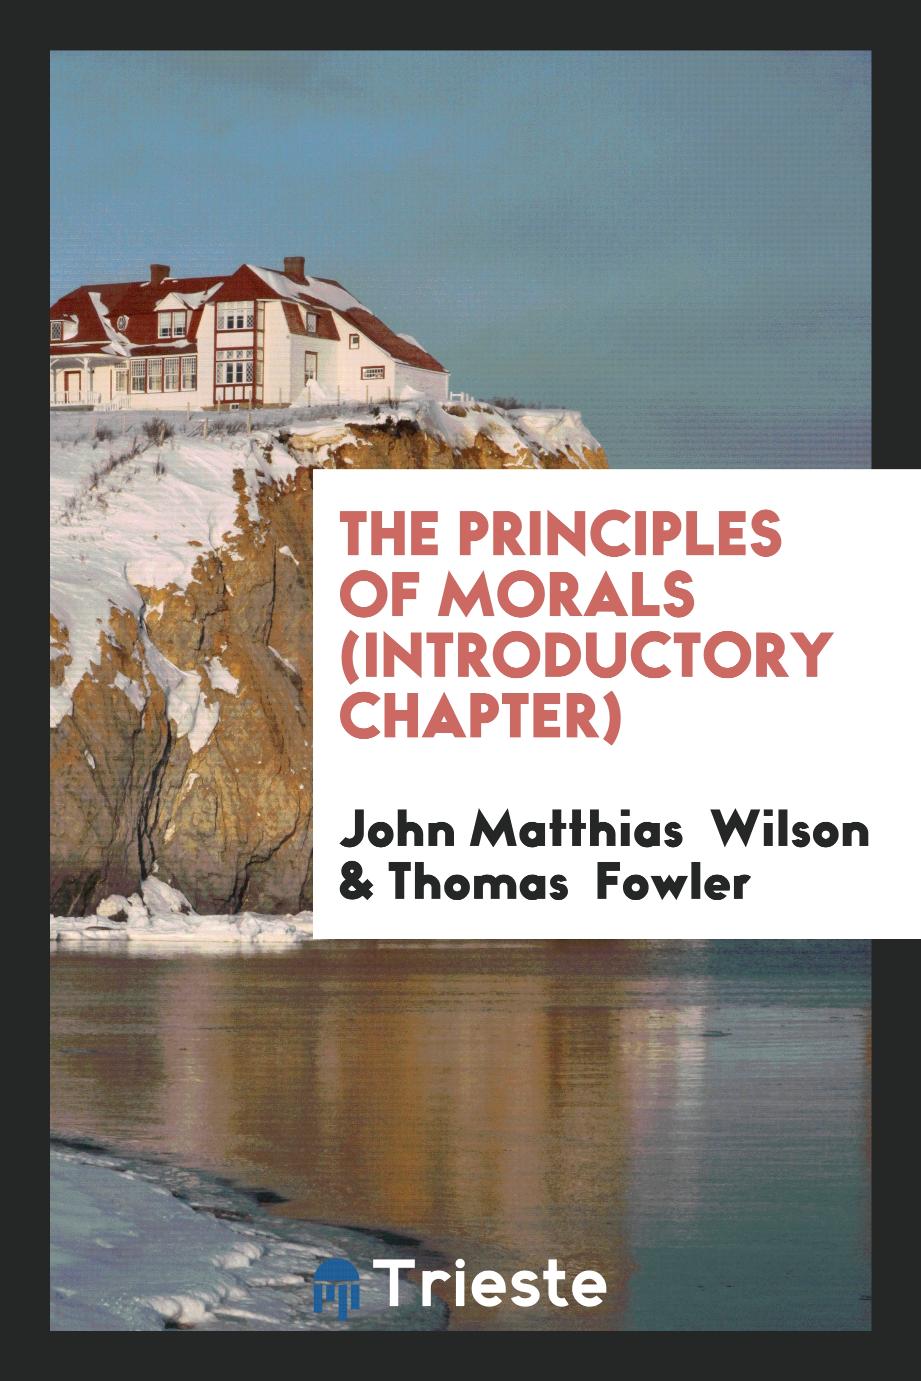 The Principles of Morals (Introductory Chapter)